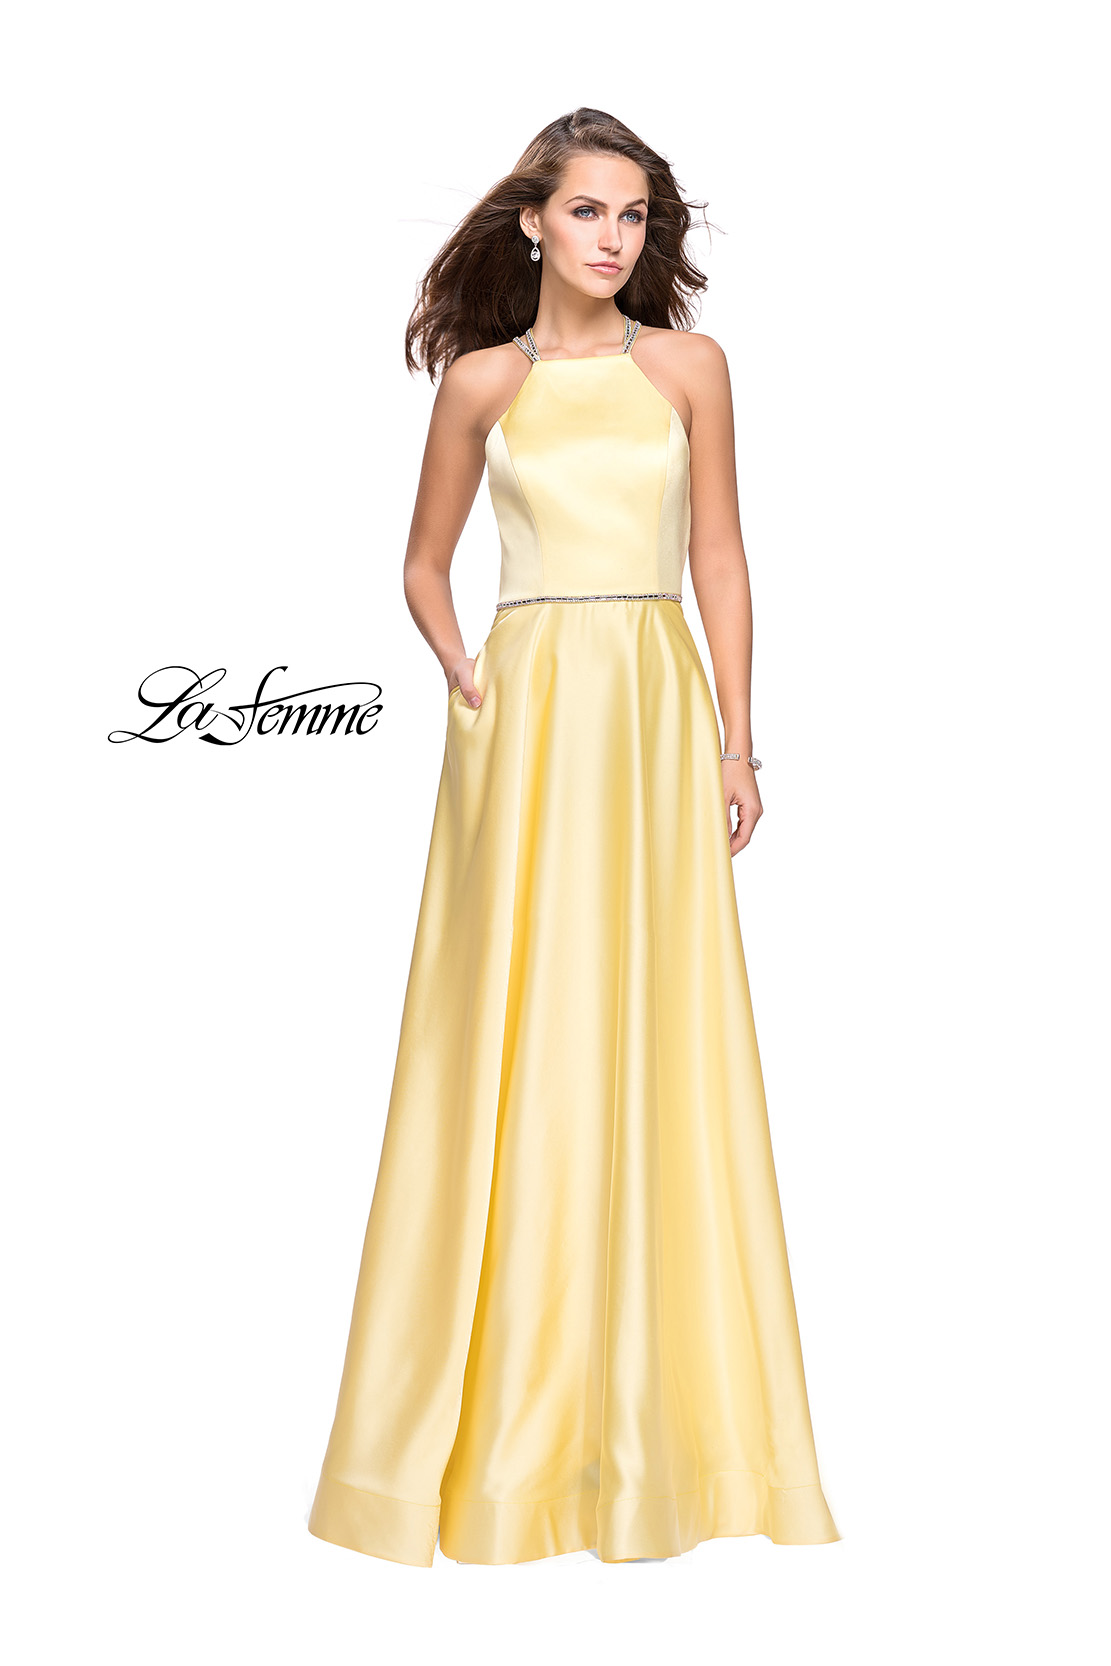 Satin Yellow Prom Dress with Belt by La Femme